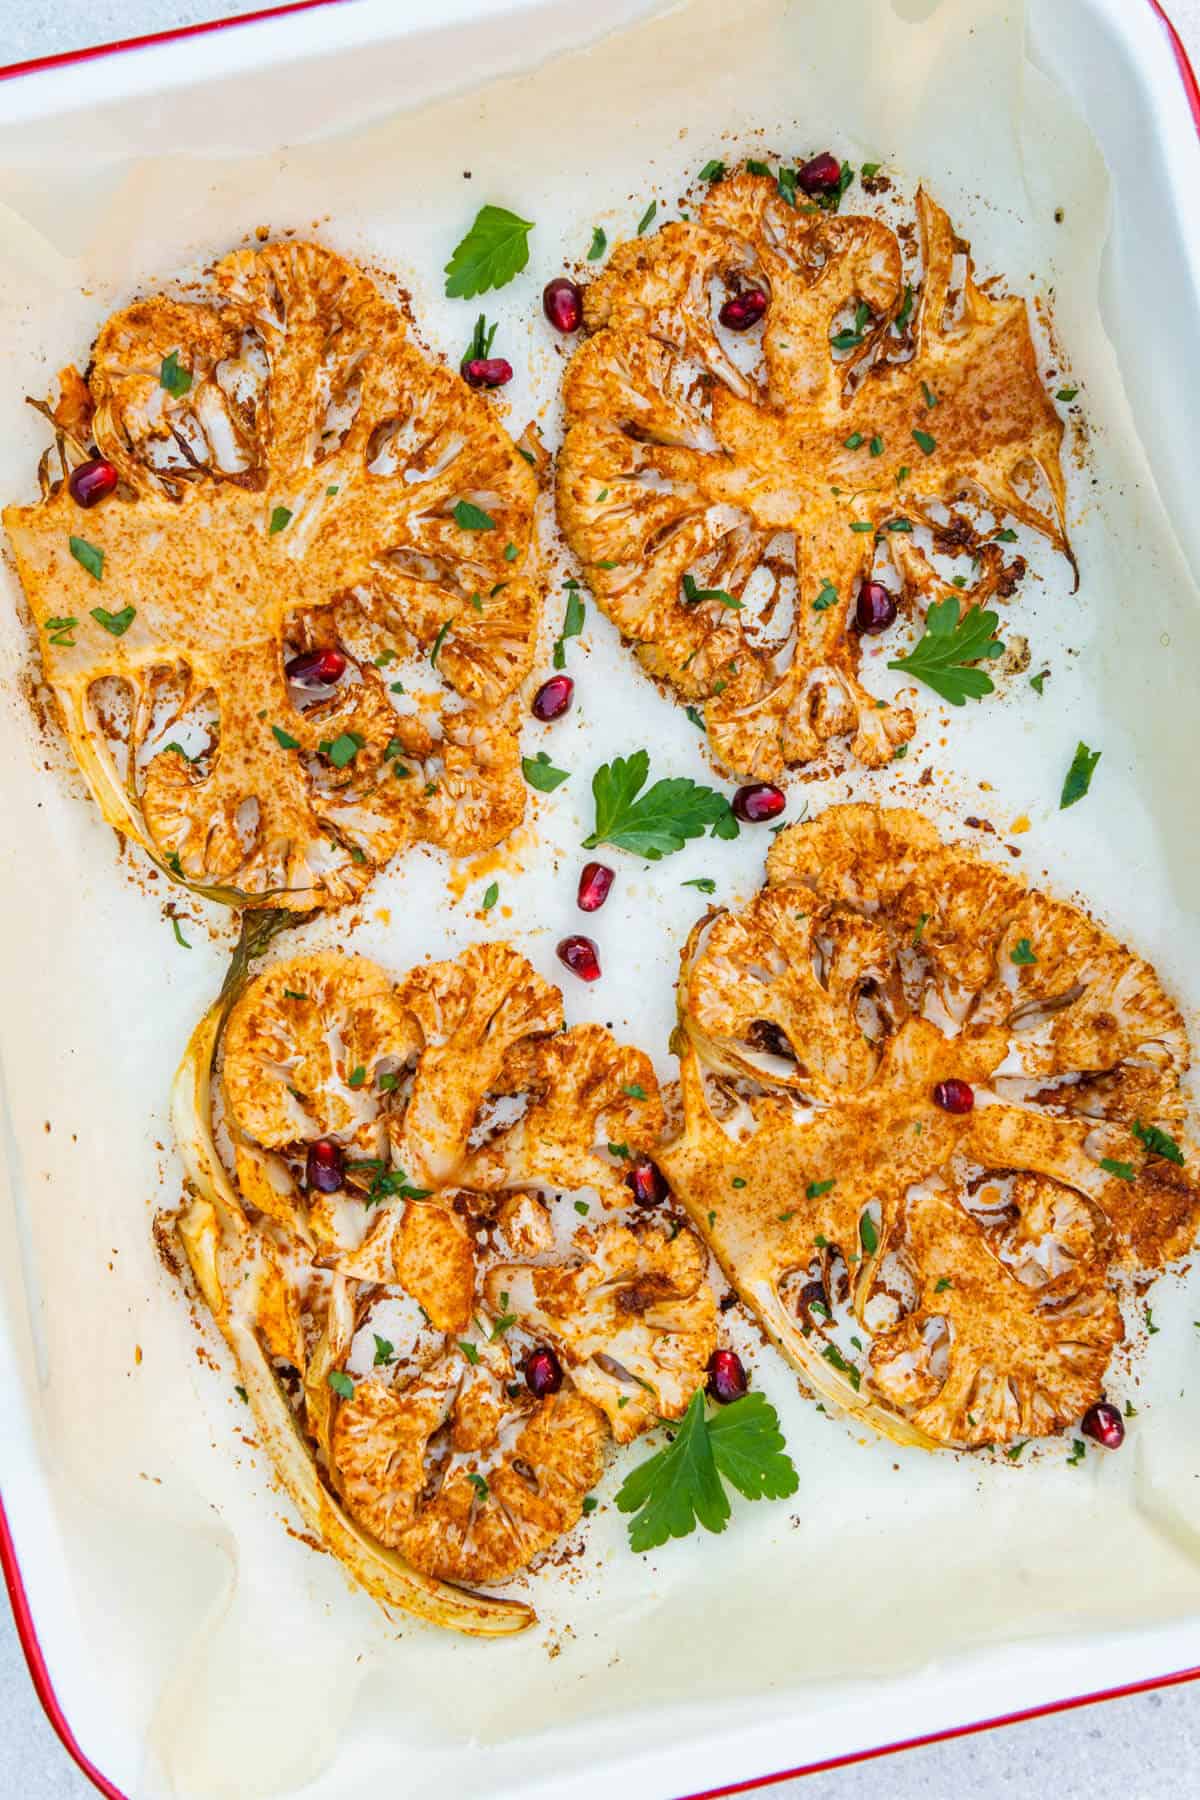 Four roasted cauliflower steaks in an oven tray